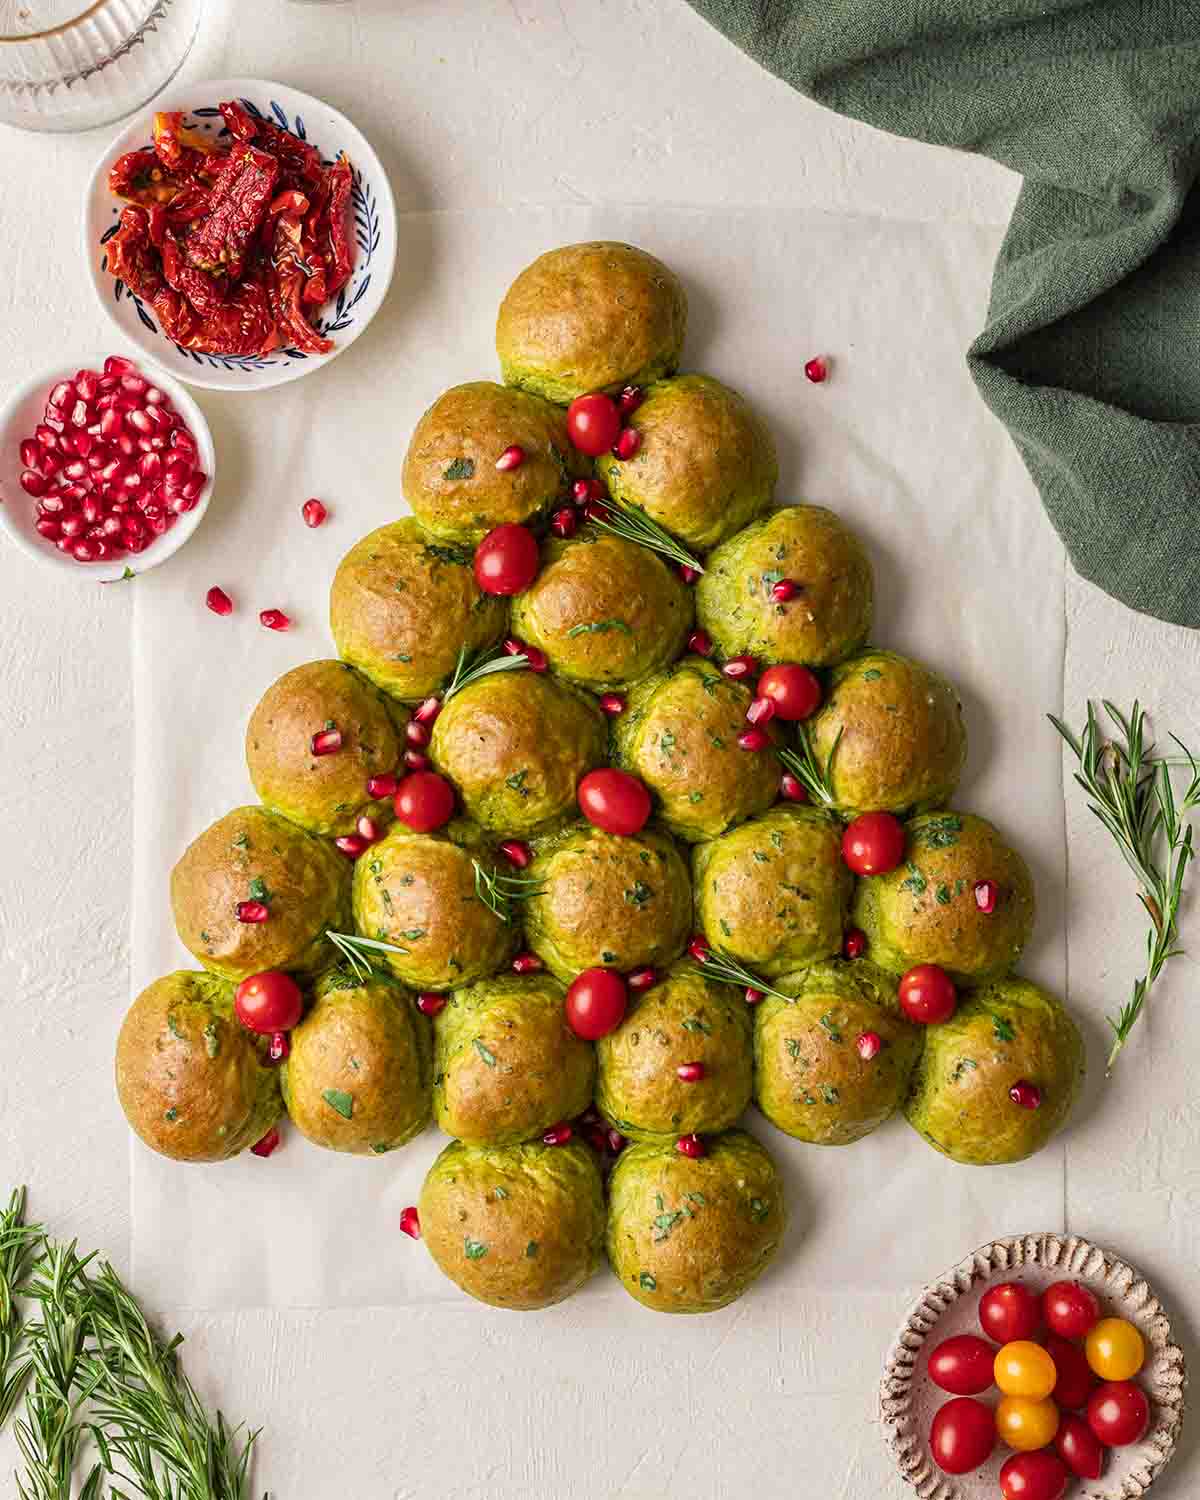 Green colored pull-apart bread shaped as a Christmas tree.